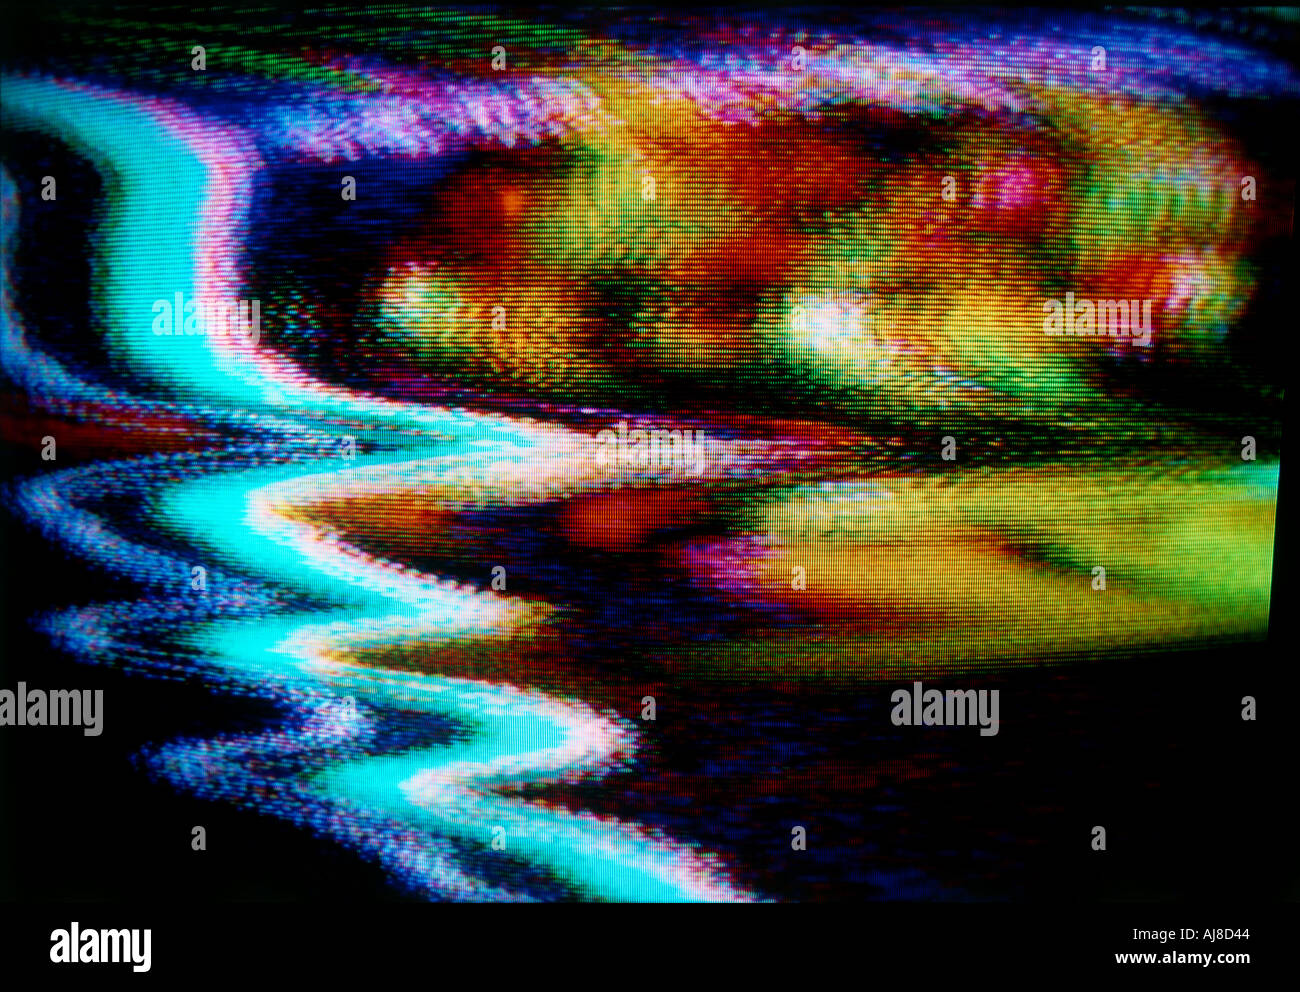 Blurry abstract TV screen pattern Stock Photo - Alamy